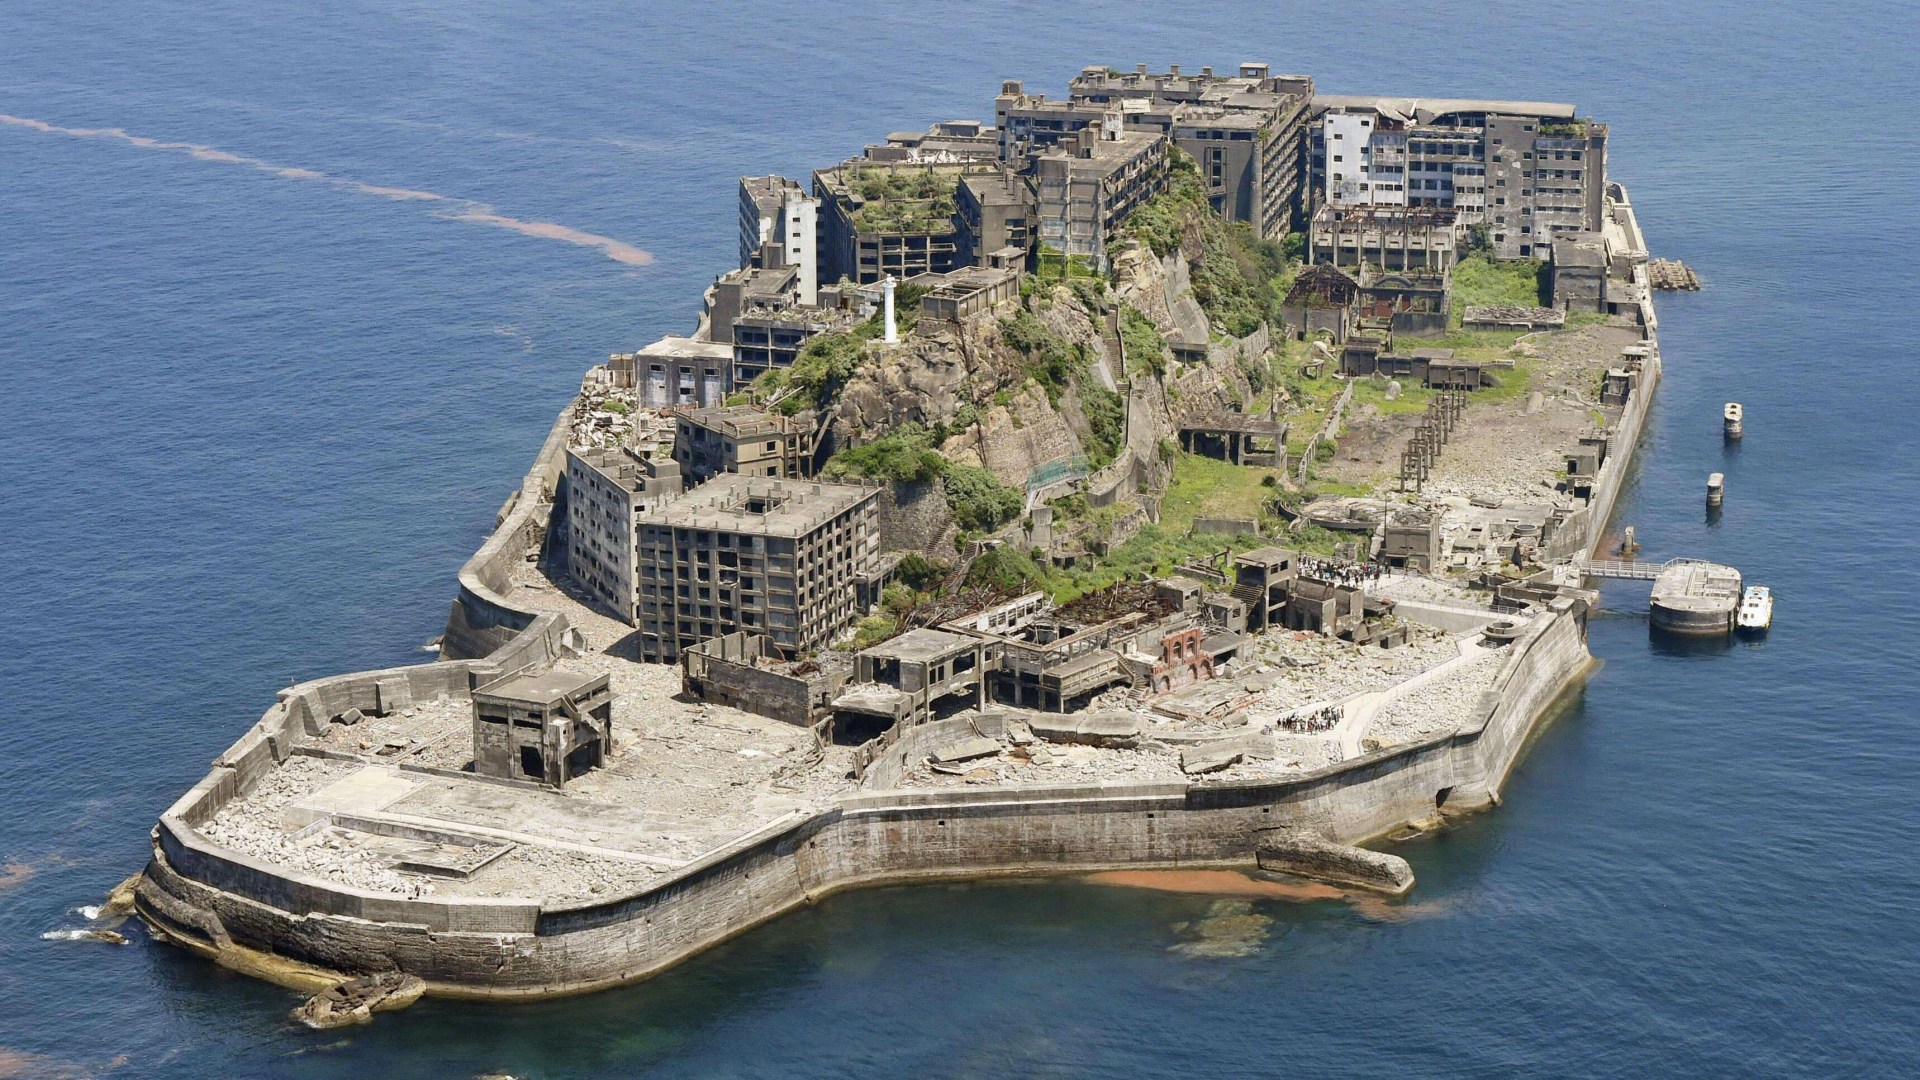 Inside world’s ‘creepiest’ abandoned island where thousands starved to death & homes were left to rot off Japan coast [Video]